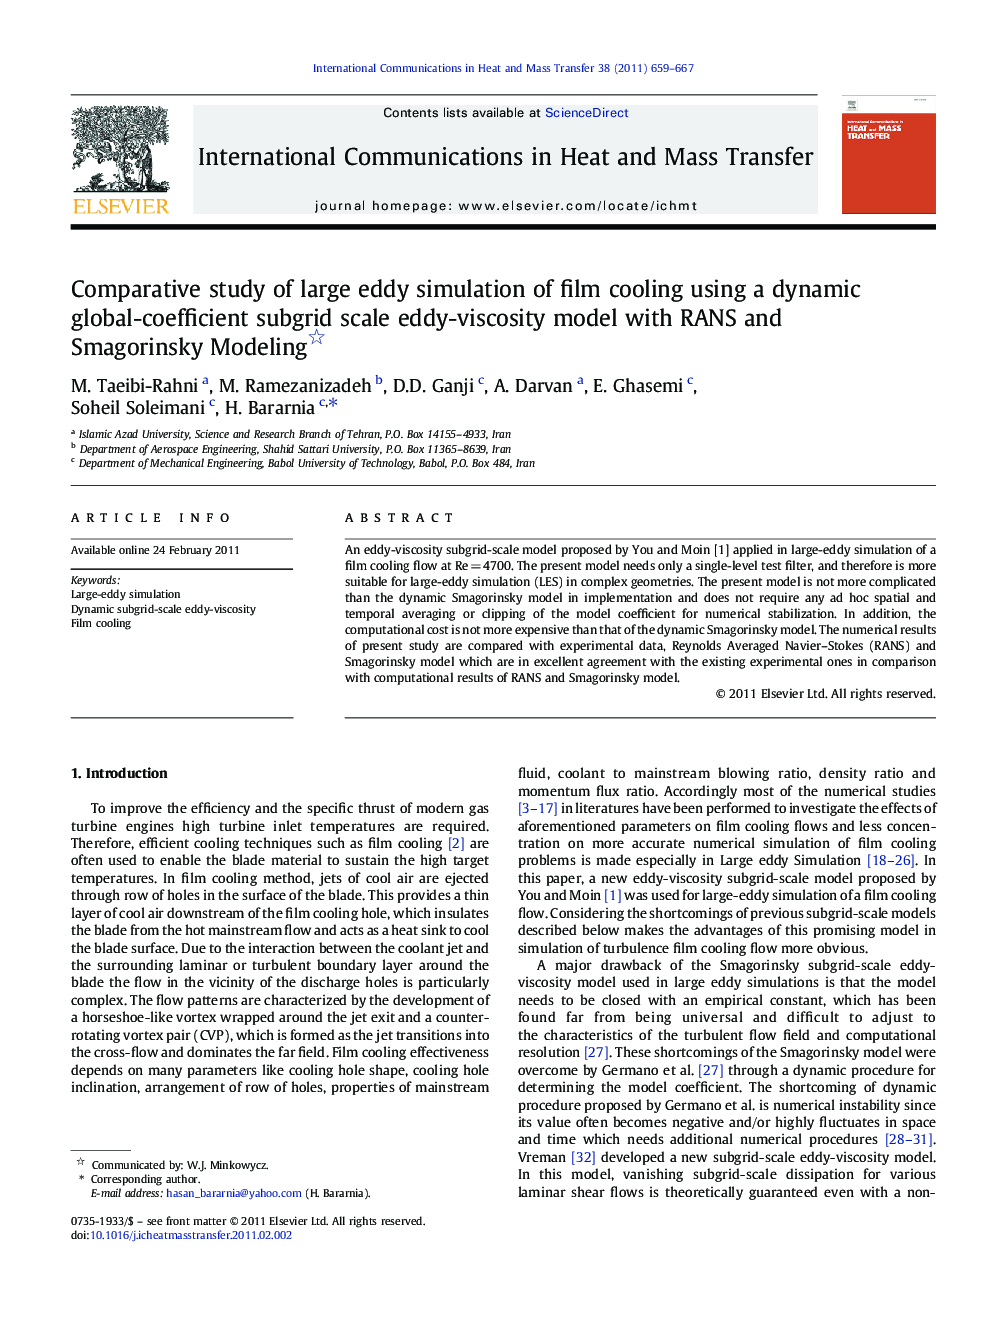 Comparative study of large eddy simulation of film cooling using a dynamic global-coefficient subgrid scale eddy-viscosity model with RANS and Smagorinsky Modeling